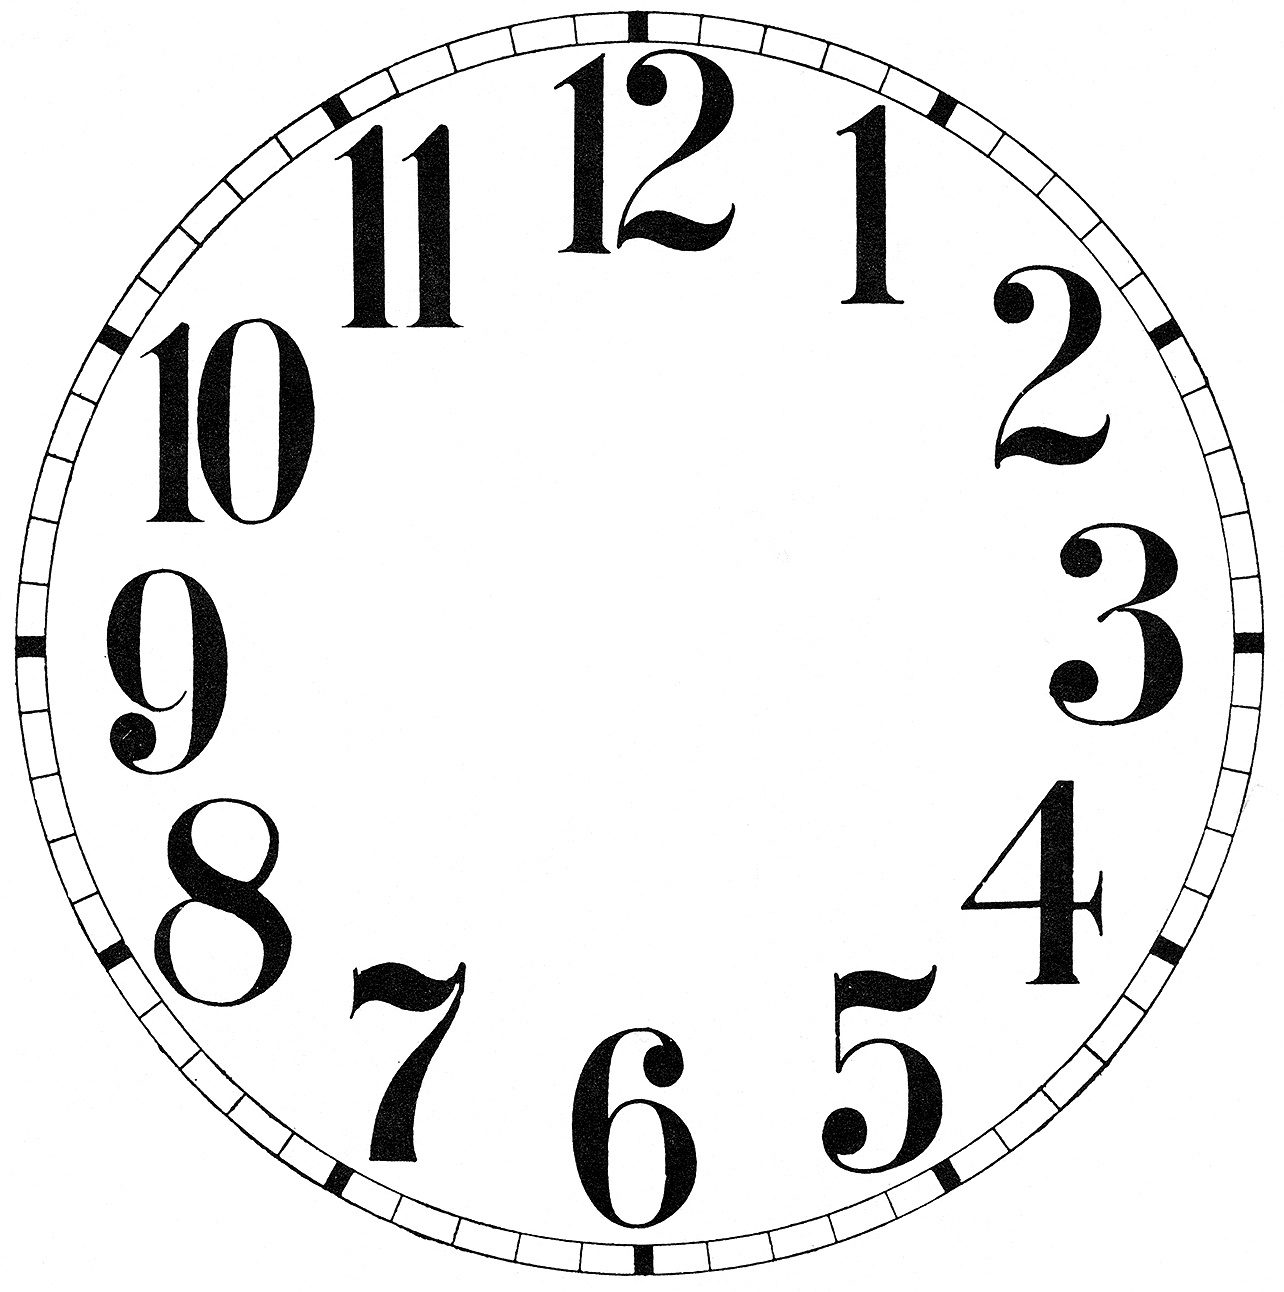 11 Clock Face Images - Print Your Own! - The Graphics Fairy - Free Printable Clock Faces